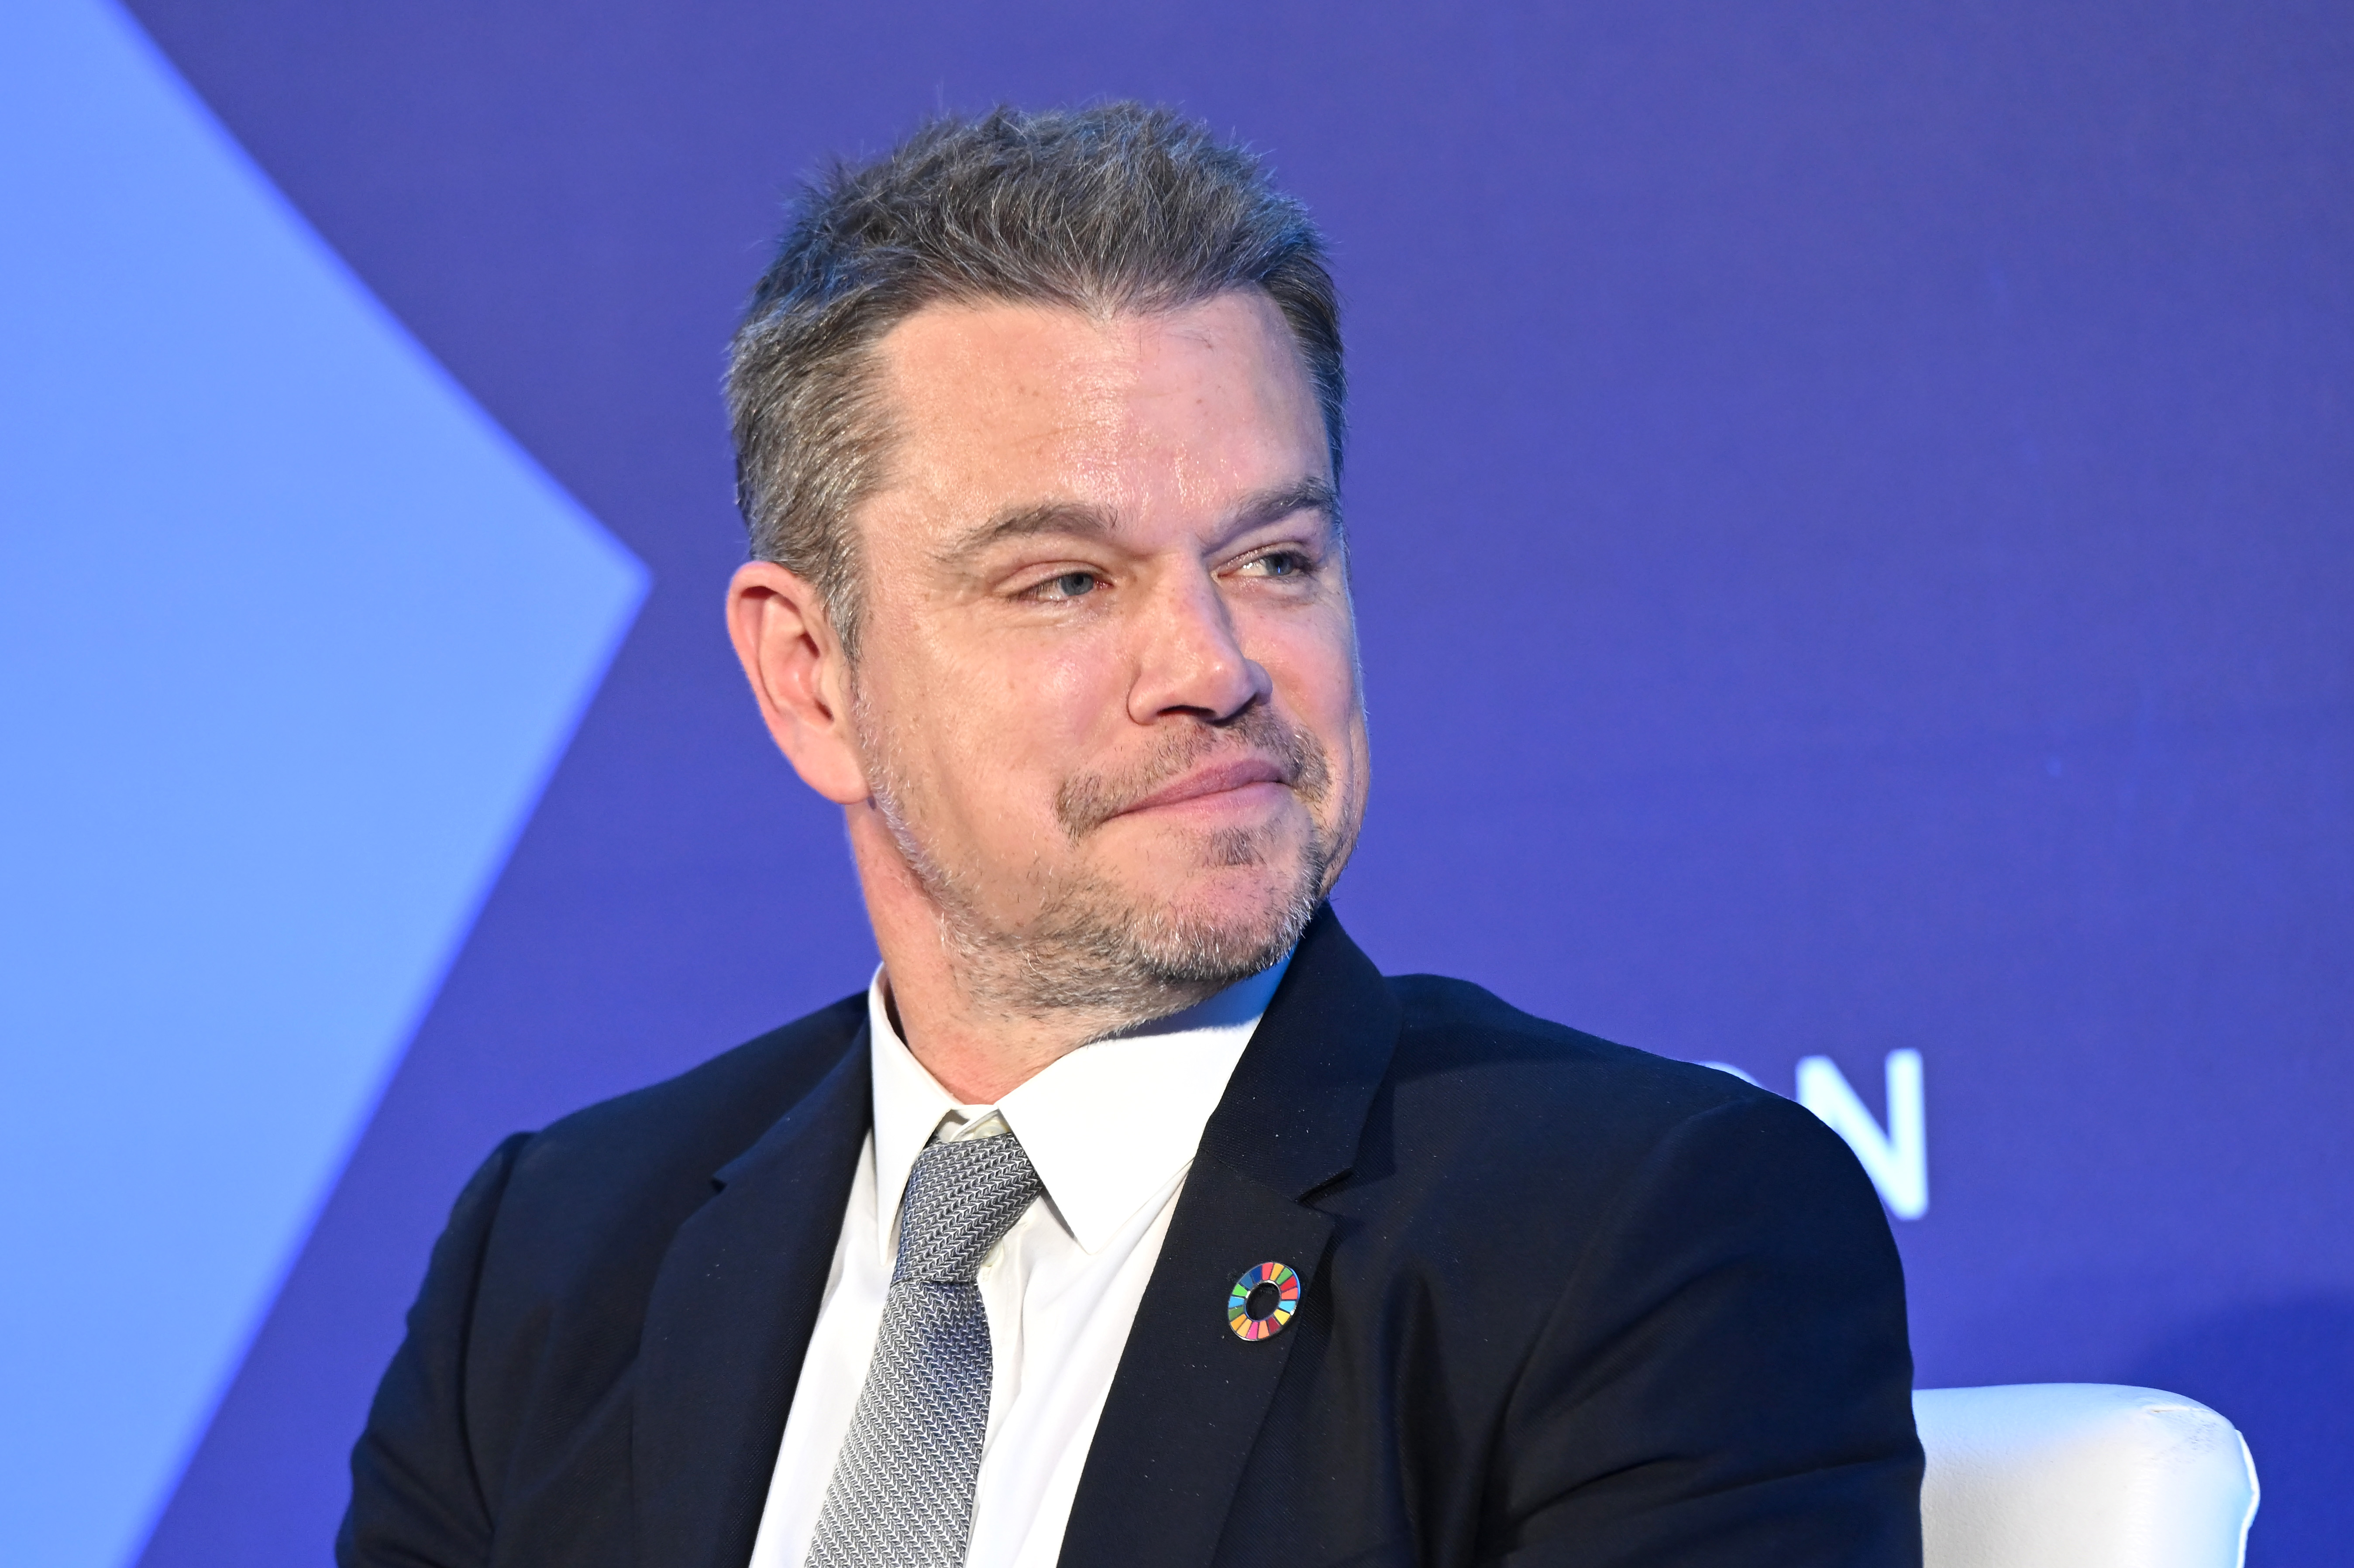 Matt Damon at the session "Shifting the Power: How New Philanthropic Approaches Can Transform the World of Social Impact" at New York Hilton Midtown on September 19, 2023 in New York City. | Source: Getty Images